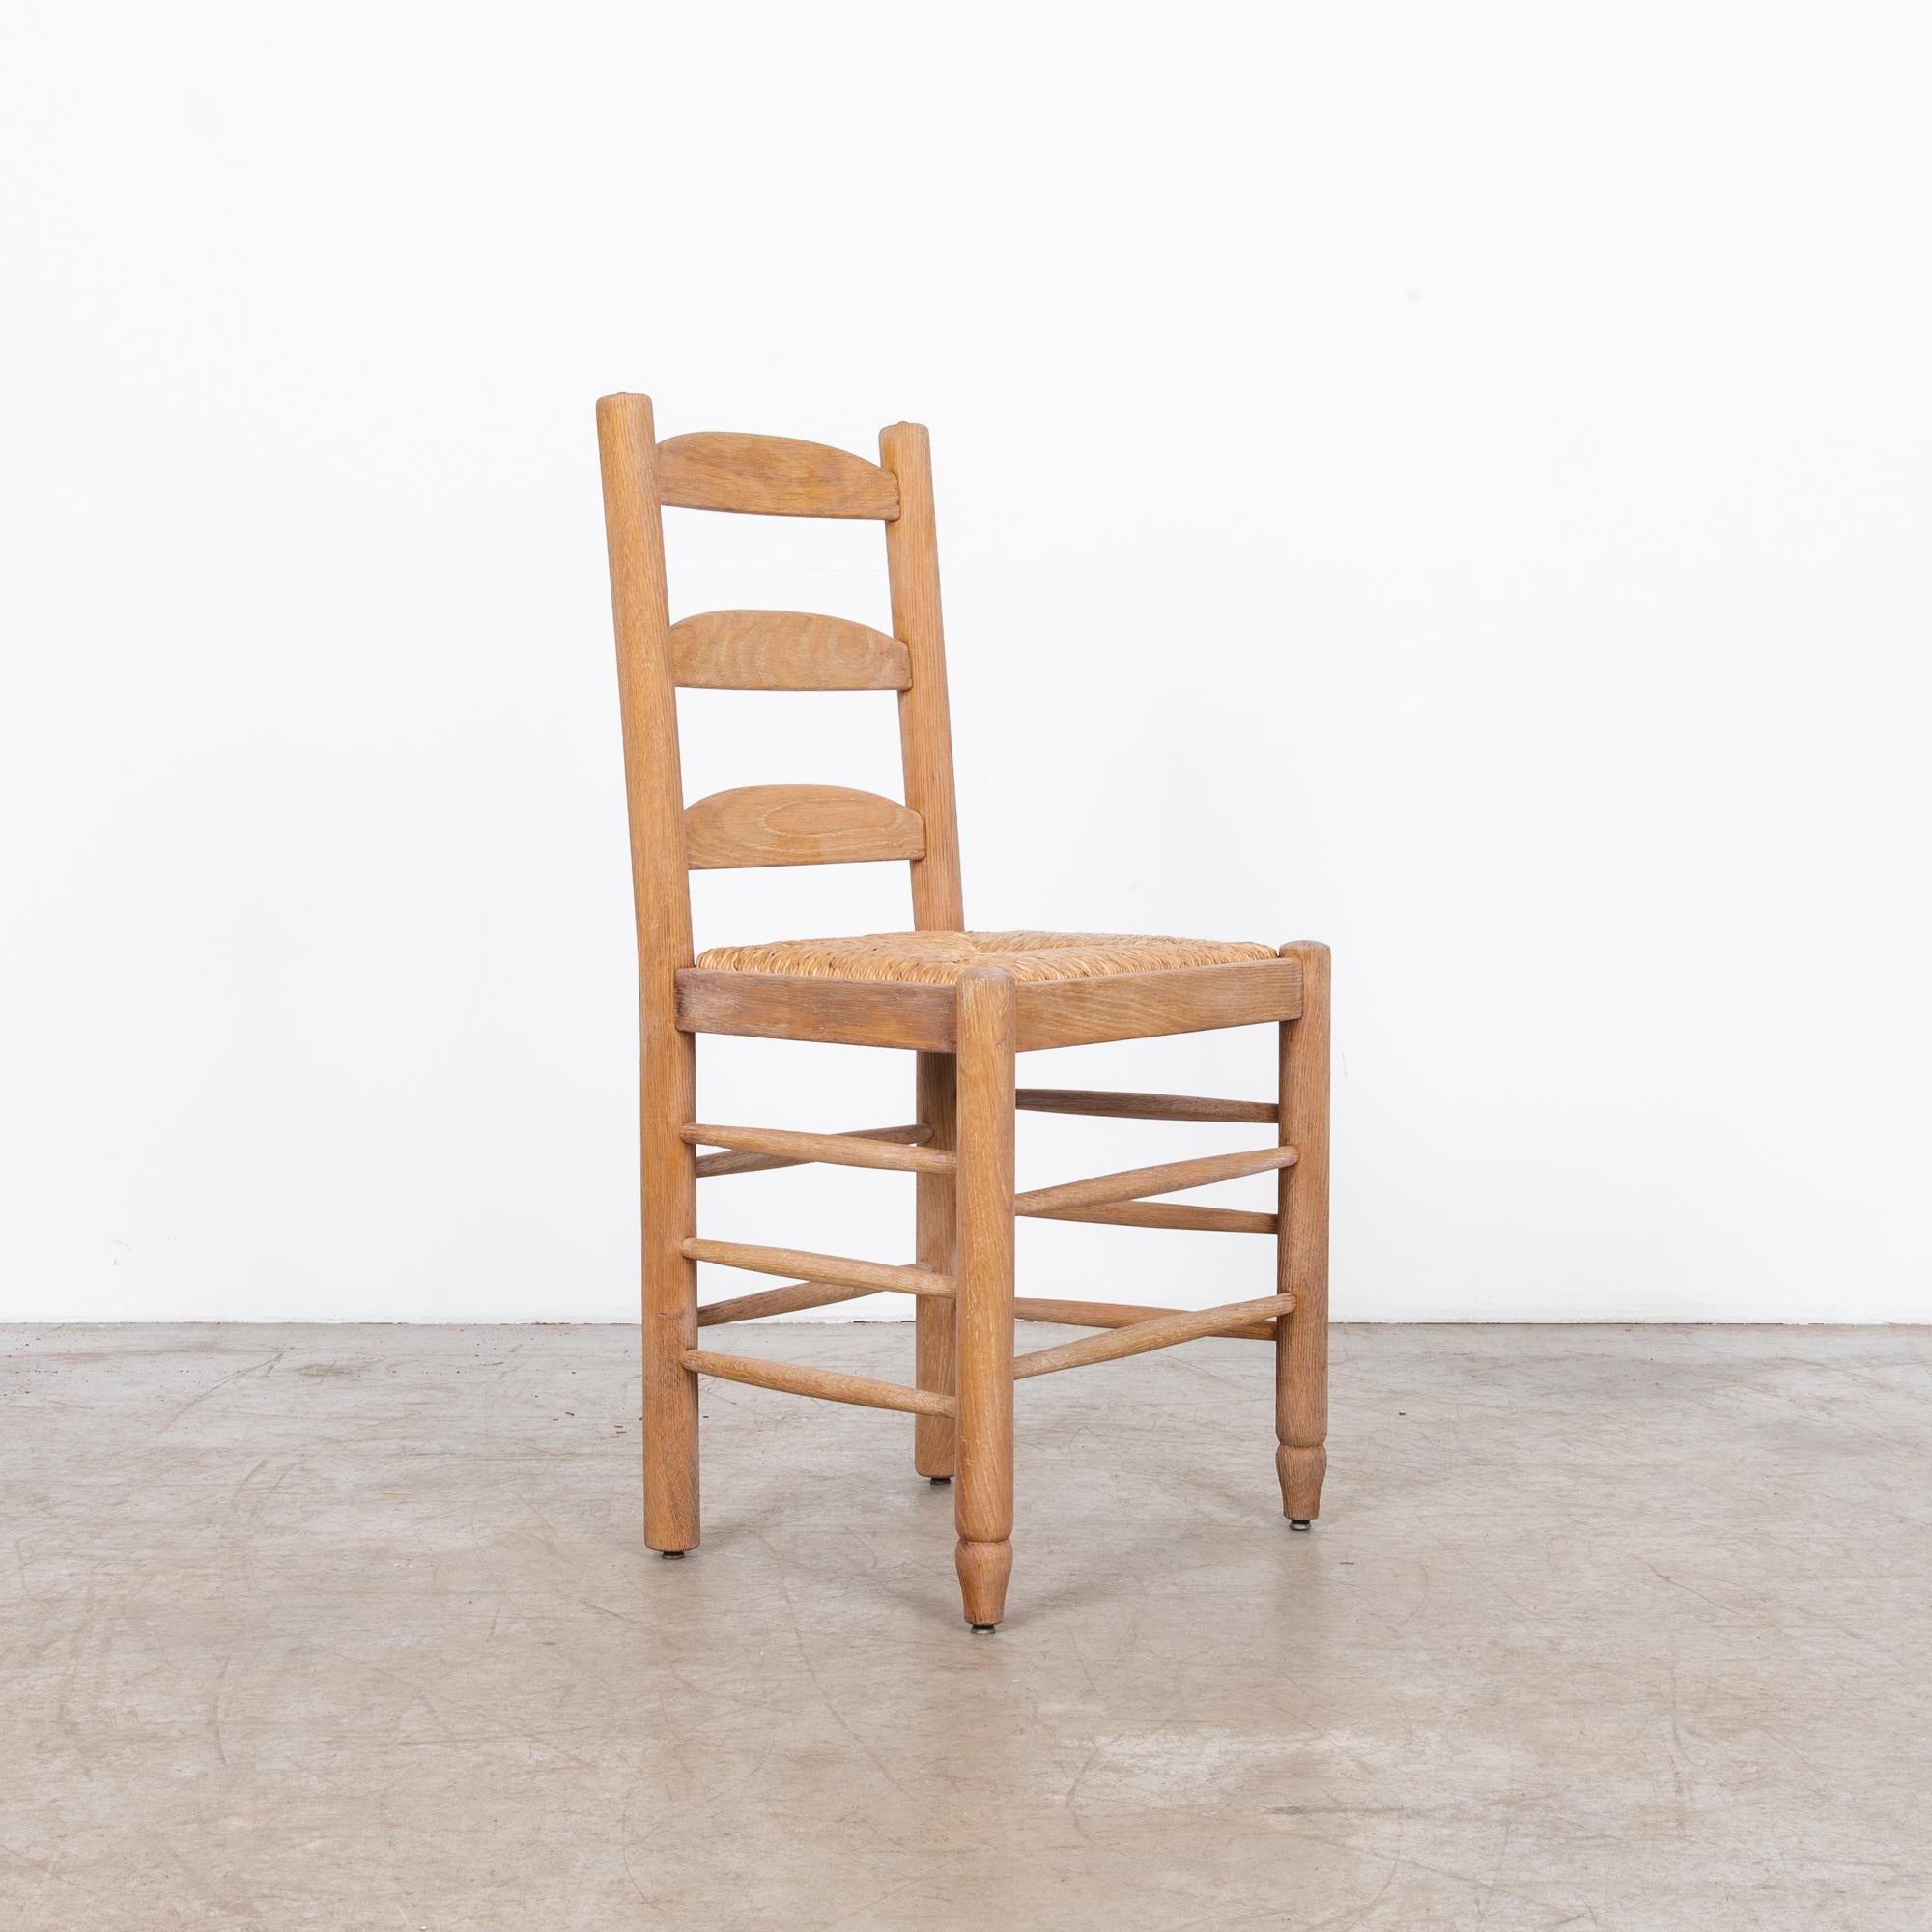 In the dynamic design landscape of 1960s Belgium, this bleached oak dining chair epitomizes the blend of functionality and style prevalent during the period. Crafted with meticulous attention to detail, this chair reflects the innovative spirit of